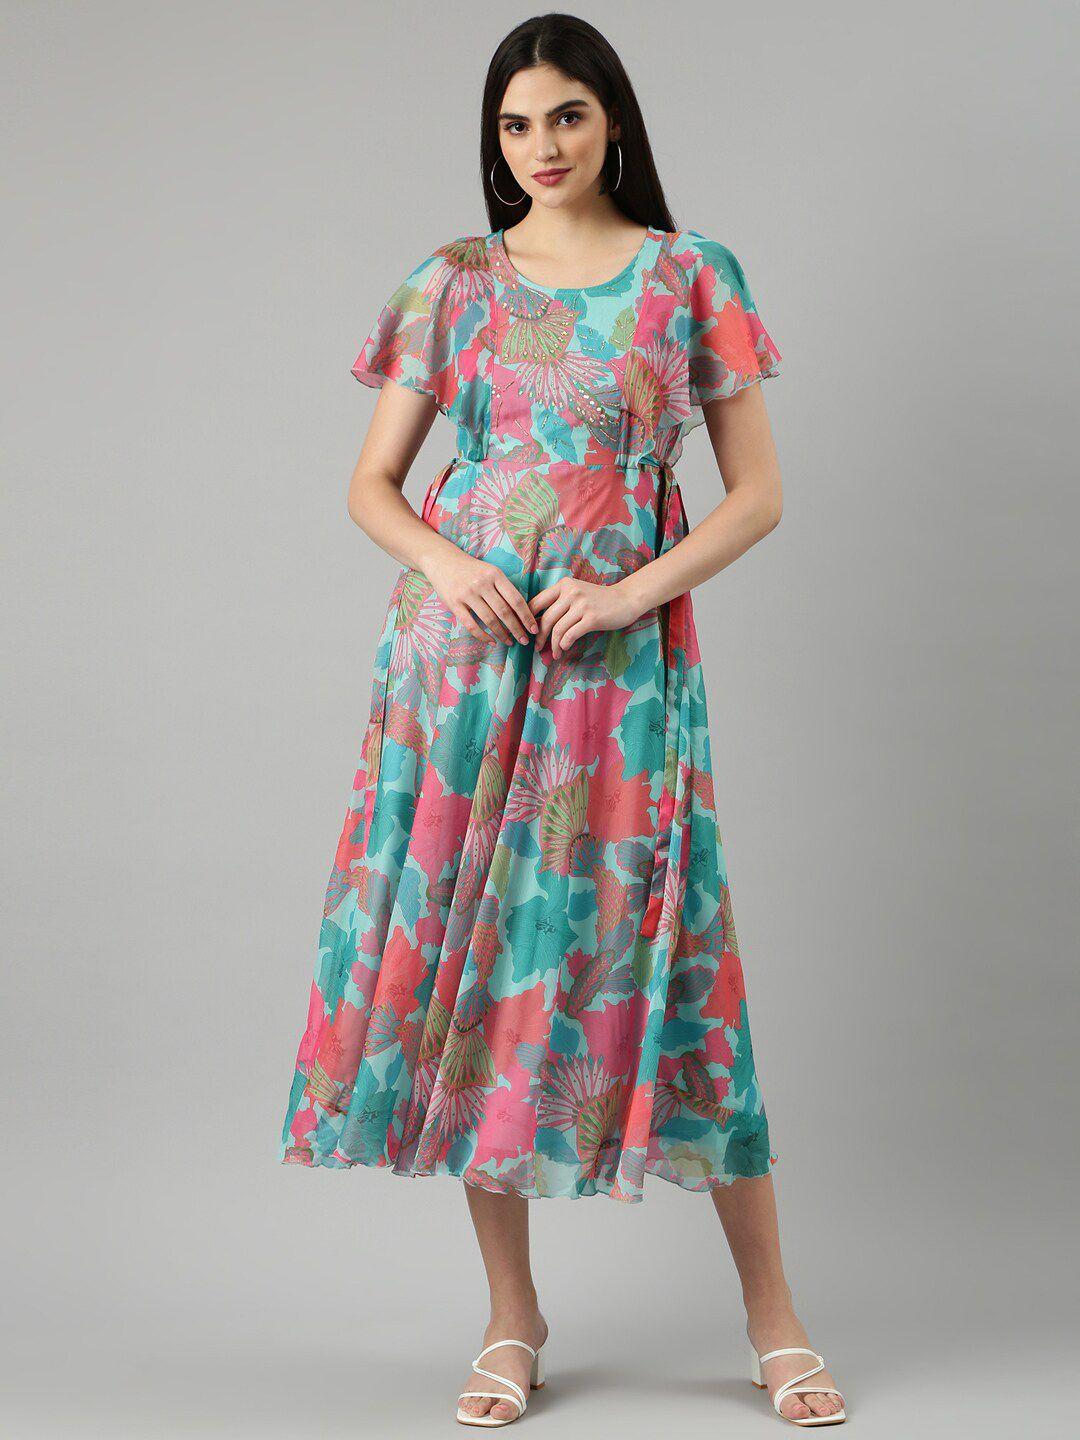 showoff floral printed chiffon flared sleeves with sequinned embellished a-line dress